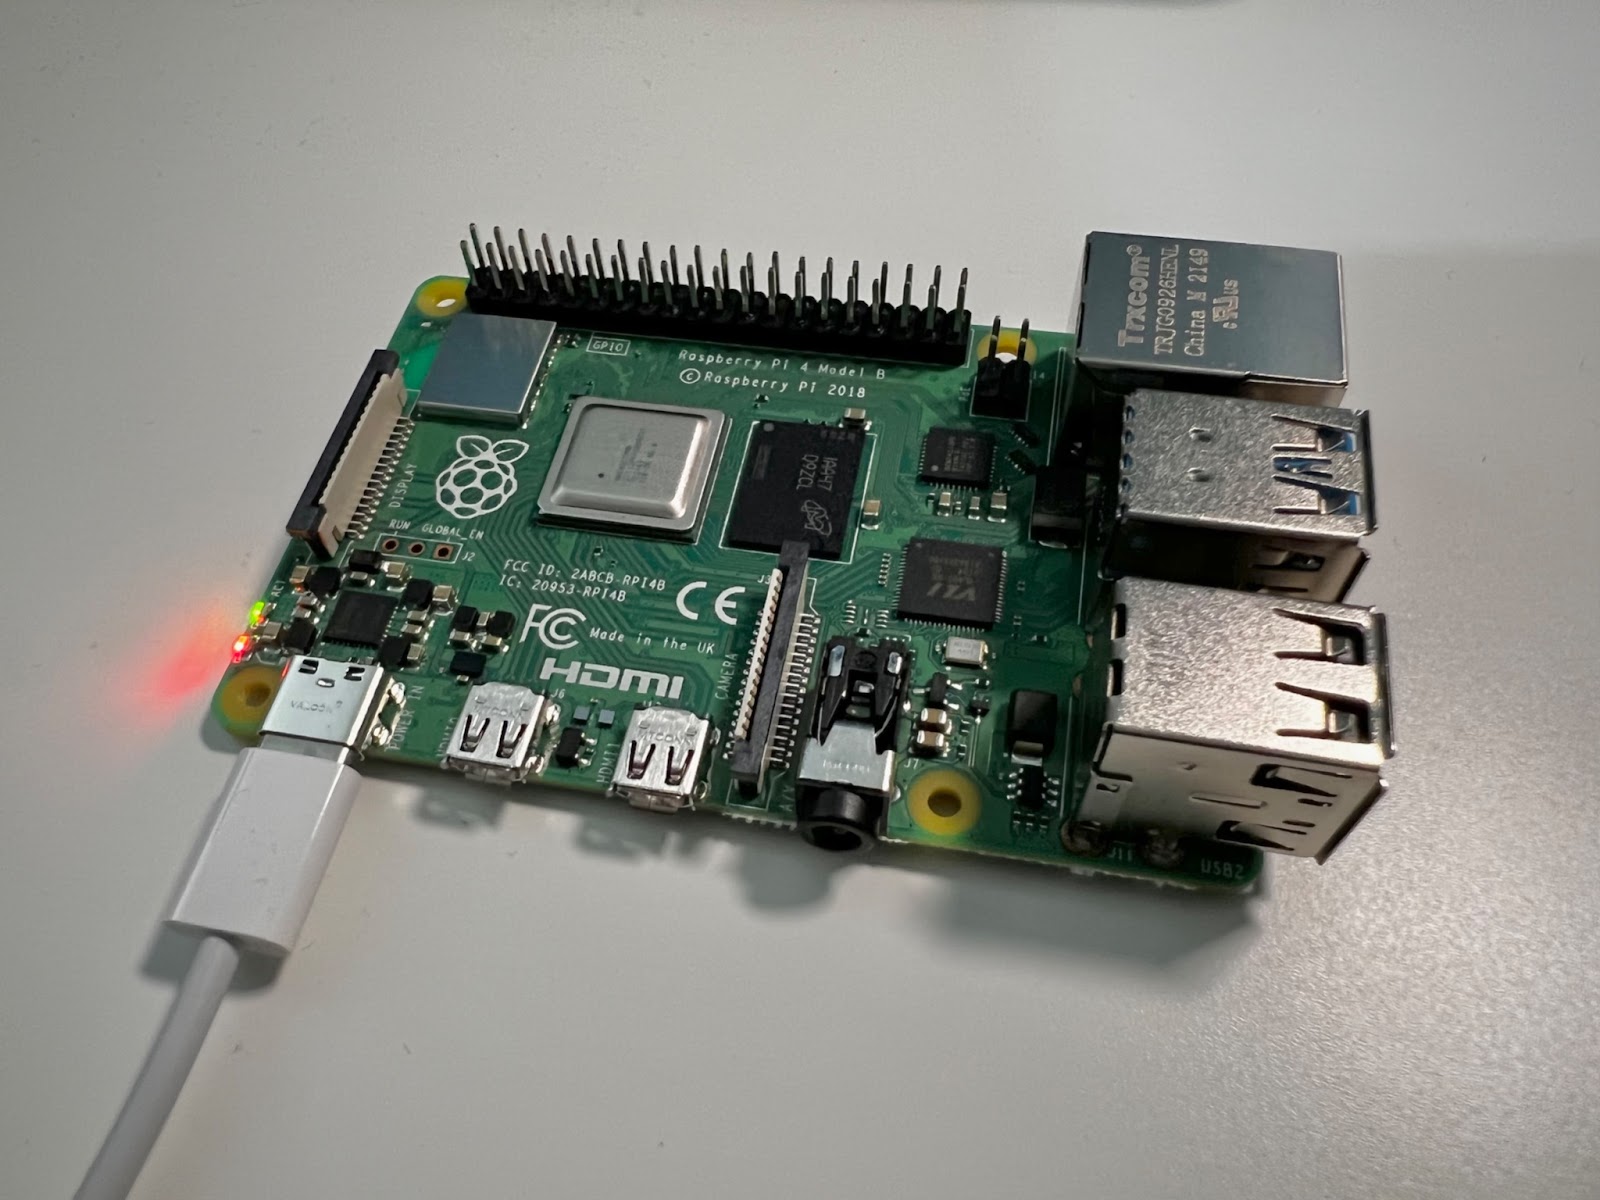 Red and green lights on Raspberry Pi